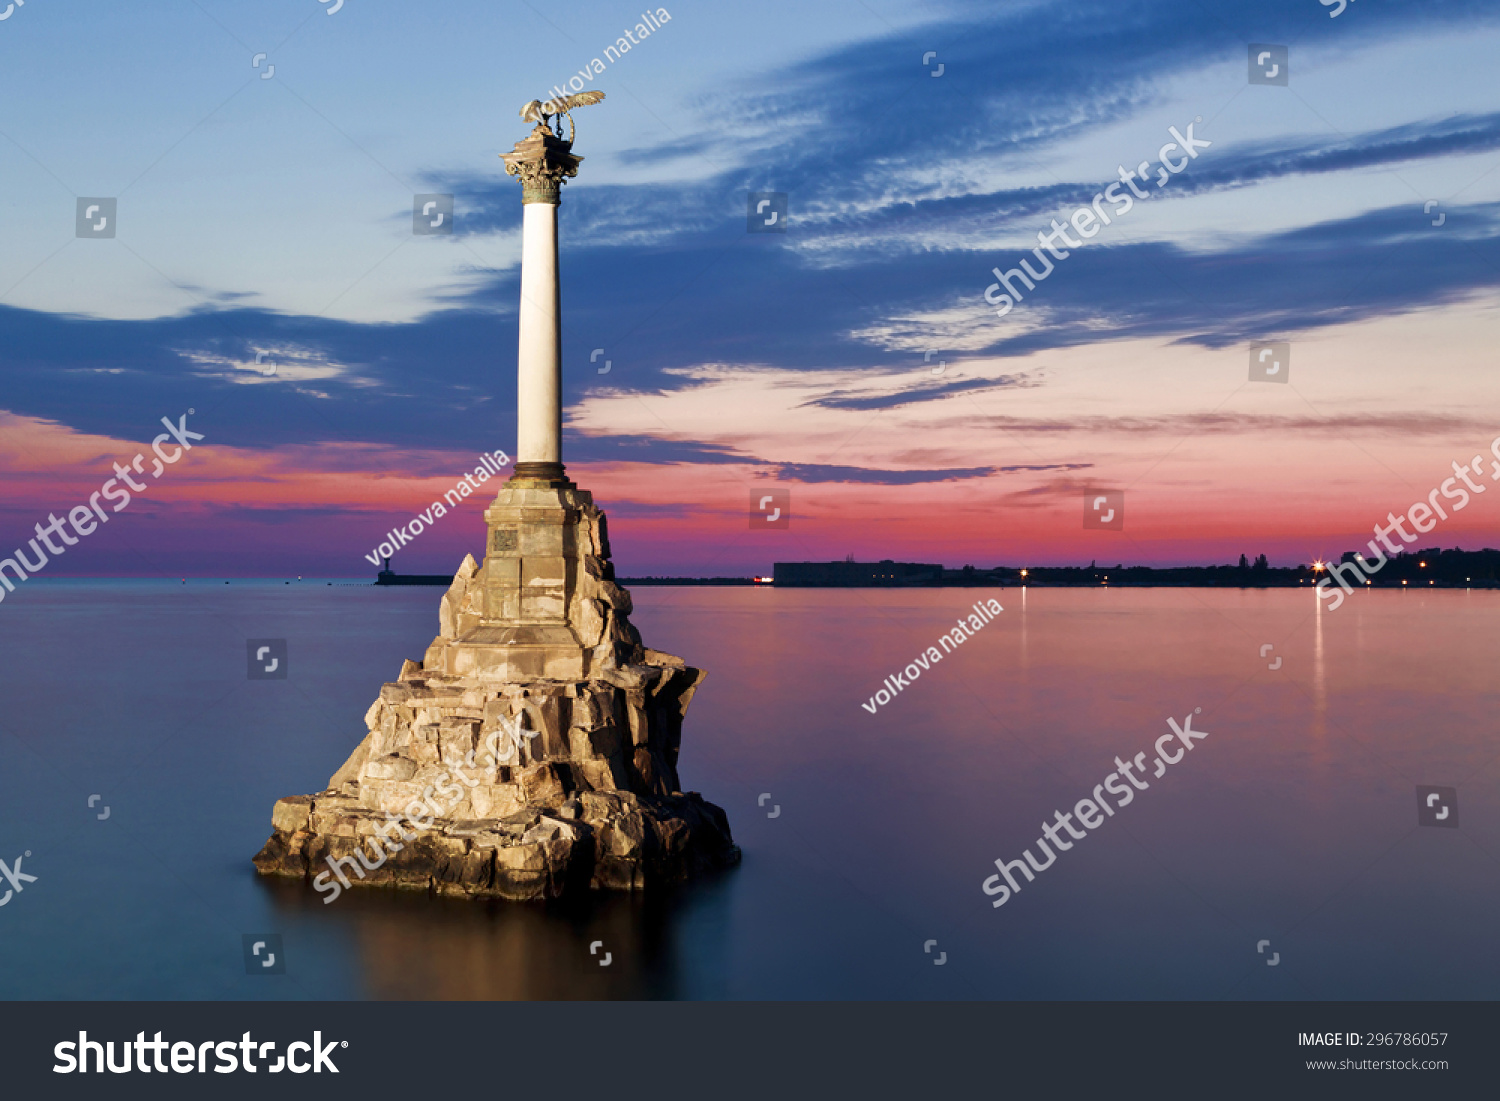 Monument to the scuttled ships at sunset. Sevastopol, Russia #296786057